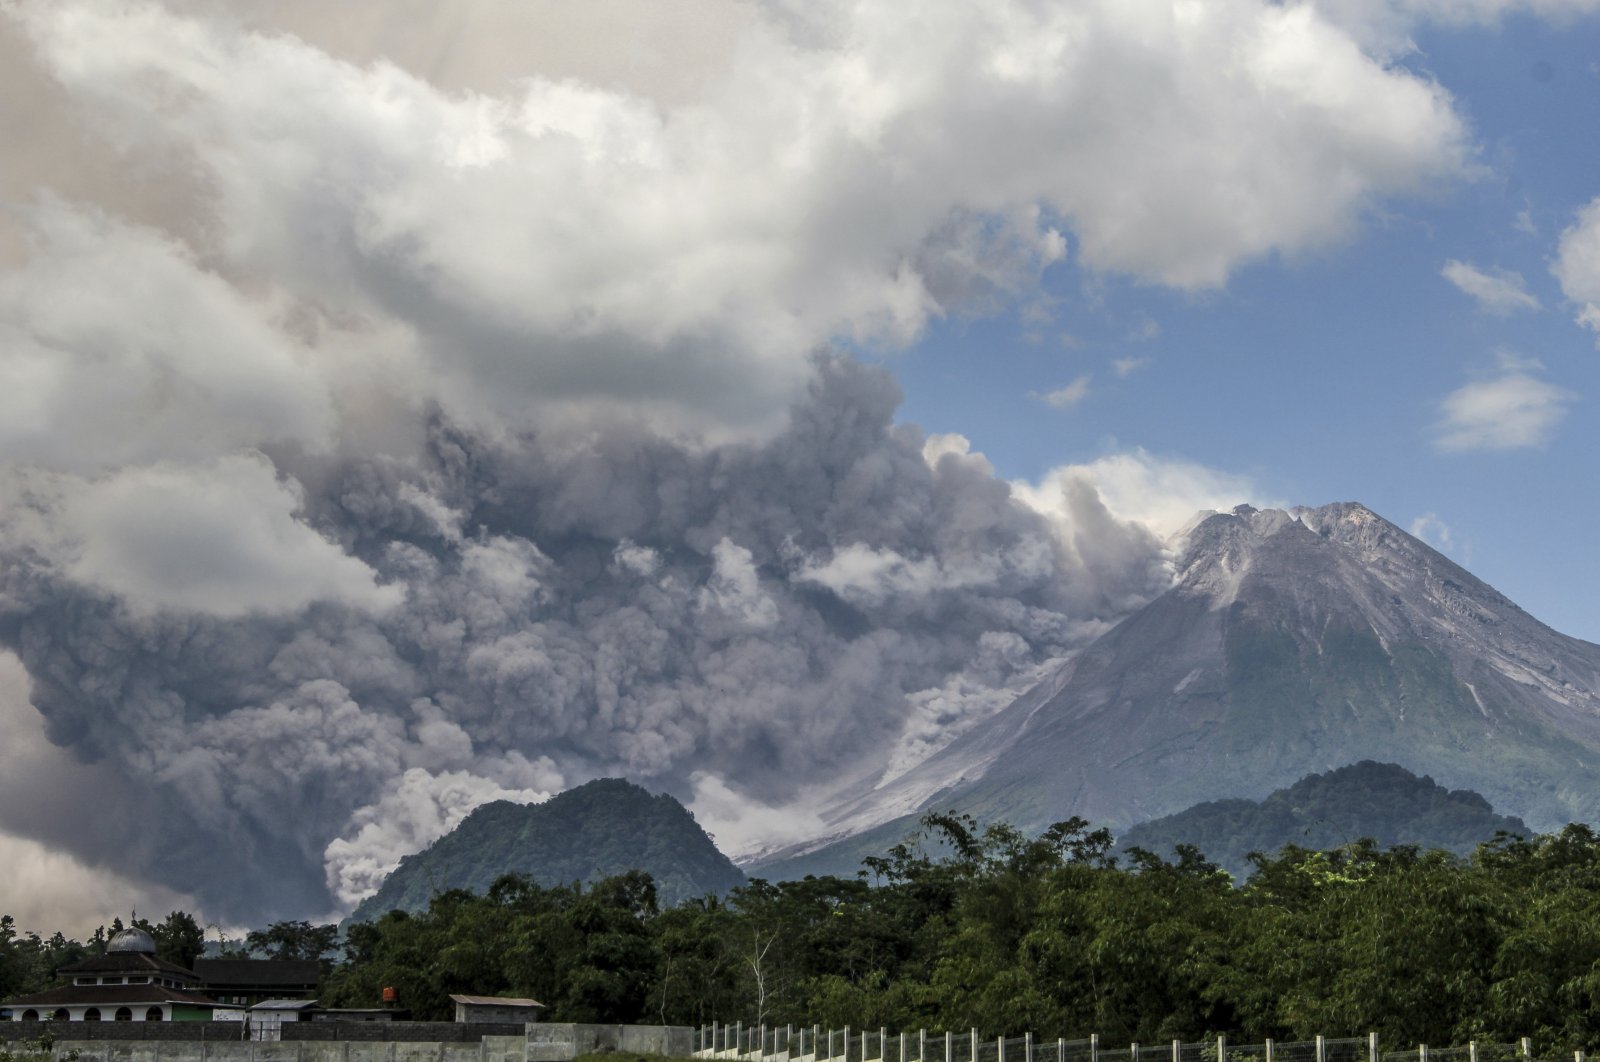 Mount Merapi releases volcanic materials during an eruption in Sleman, Indonesia, March 11, 2023. (AP Photo)